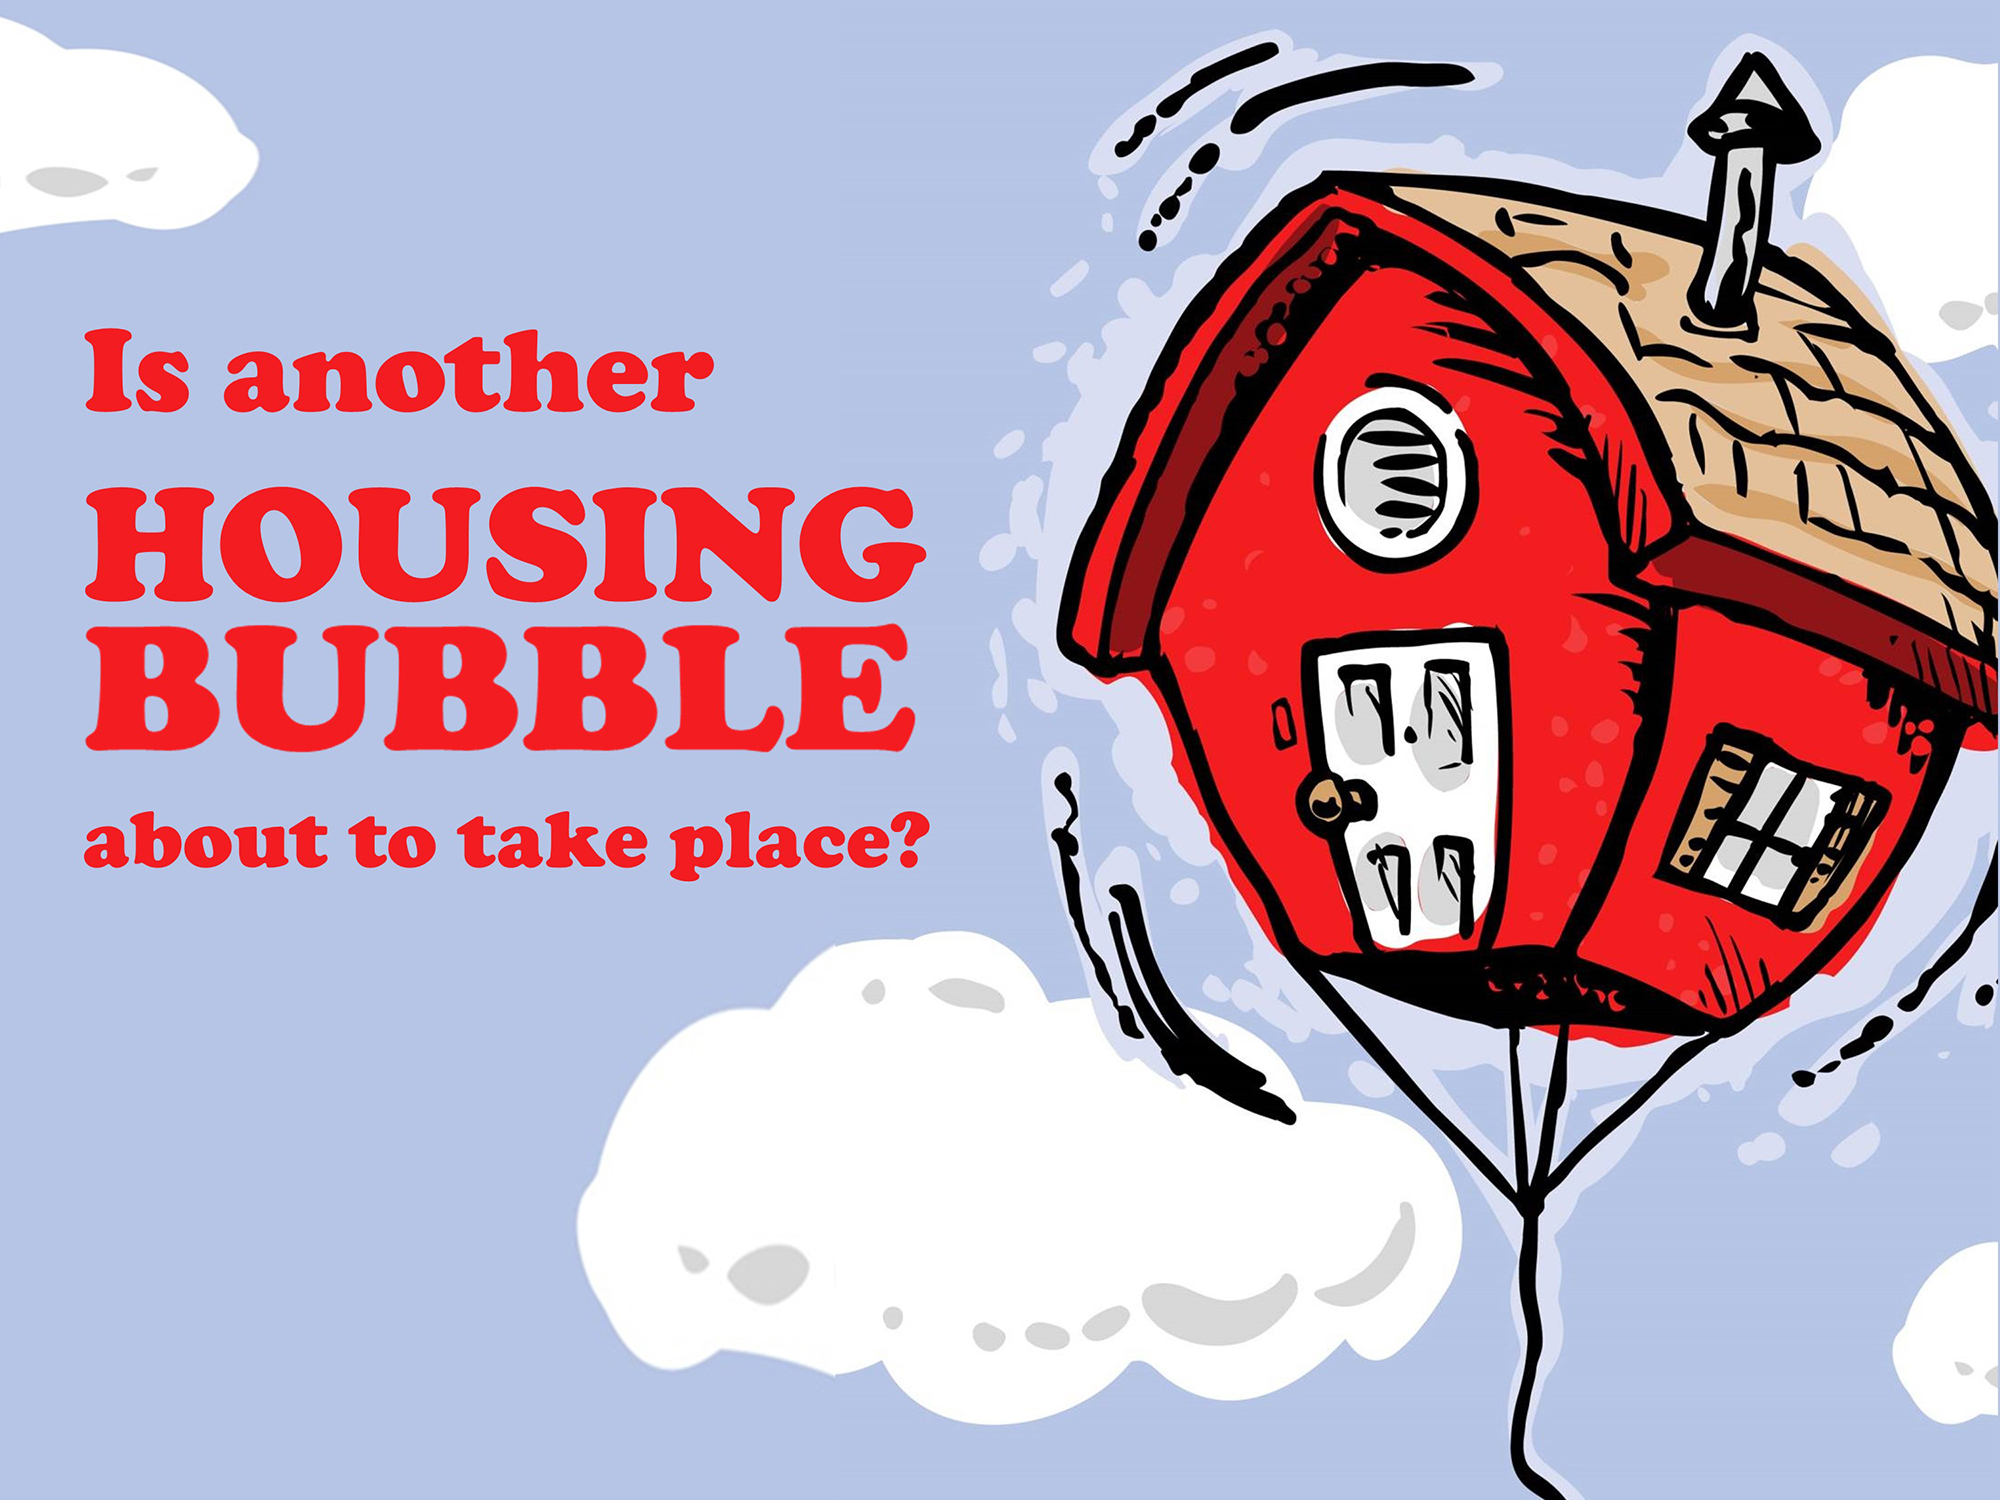 Home Sales: Is Another Bubble Forming?